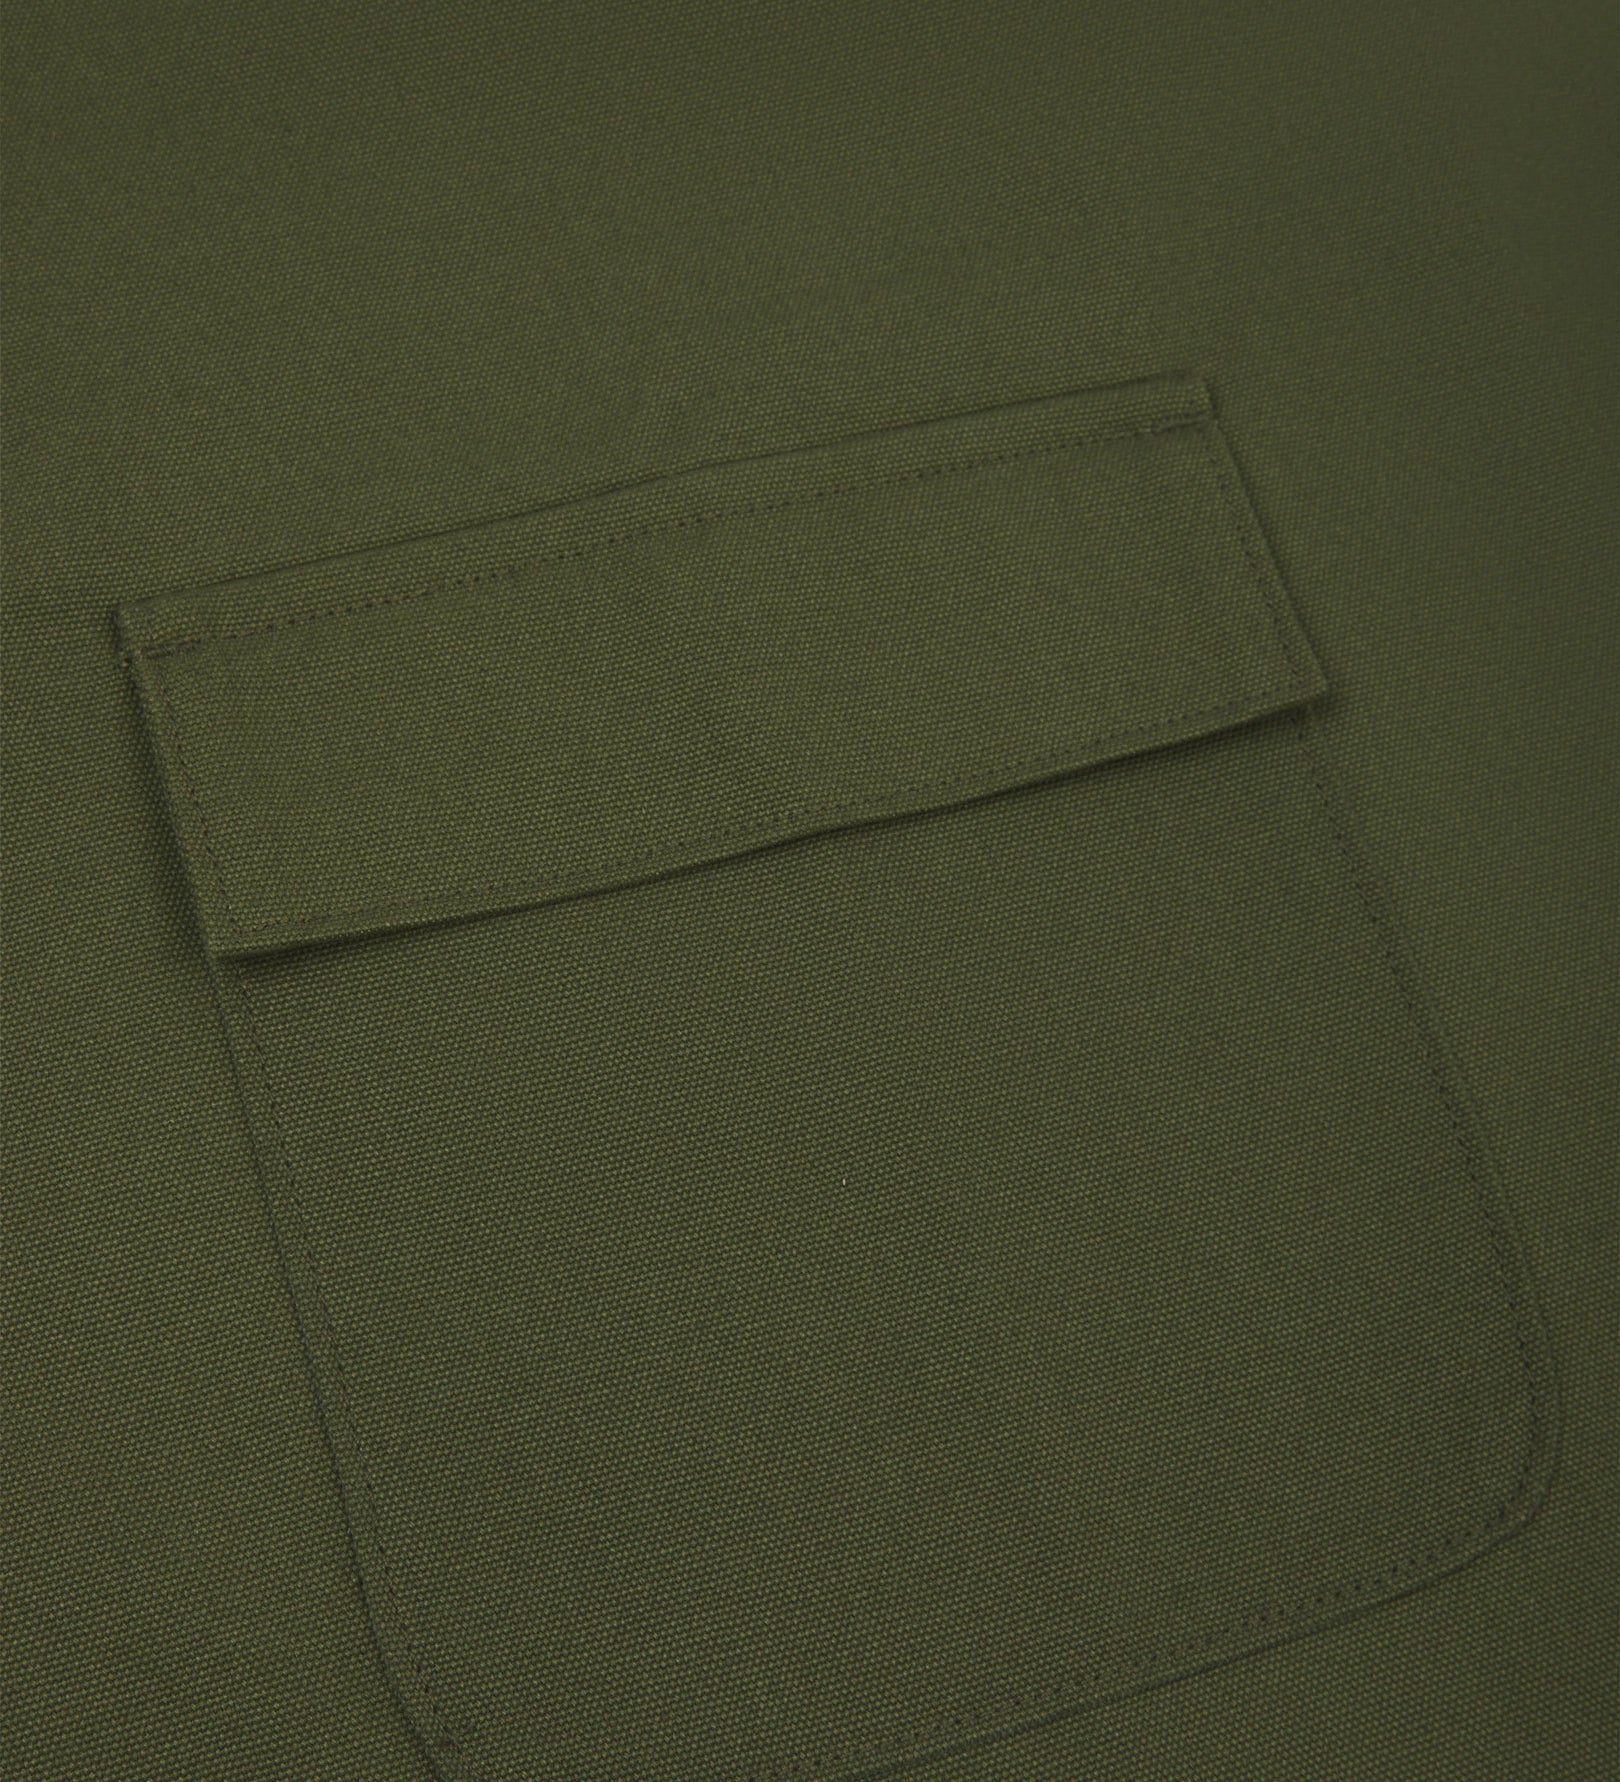 Close up shot of Uskees green canvas apron showing front flap pocket.